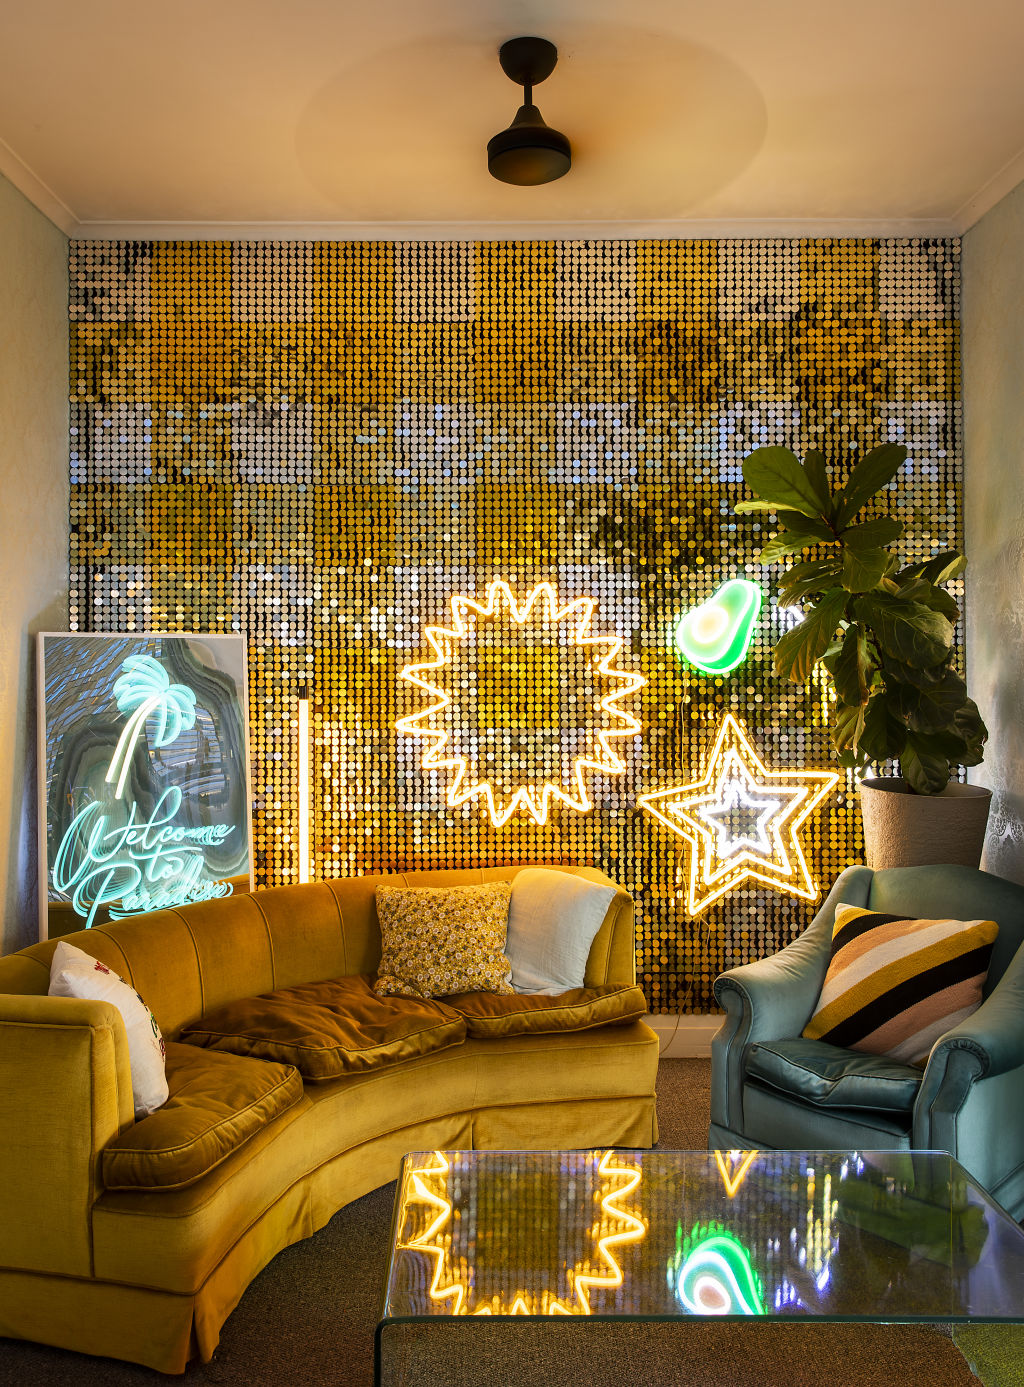 The gold shimmer wall in the living room flutters under a fan-forced breeze. Photo: Charlie Kinross